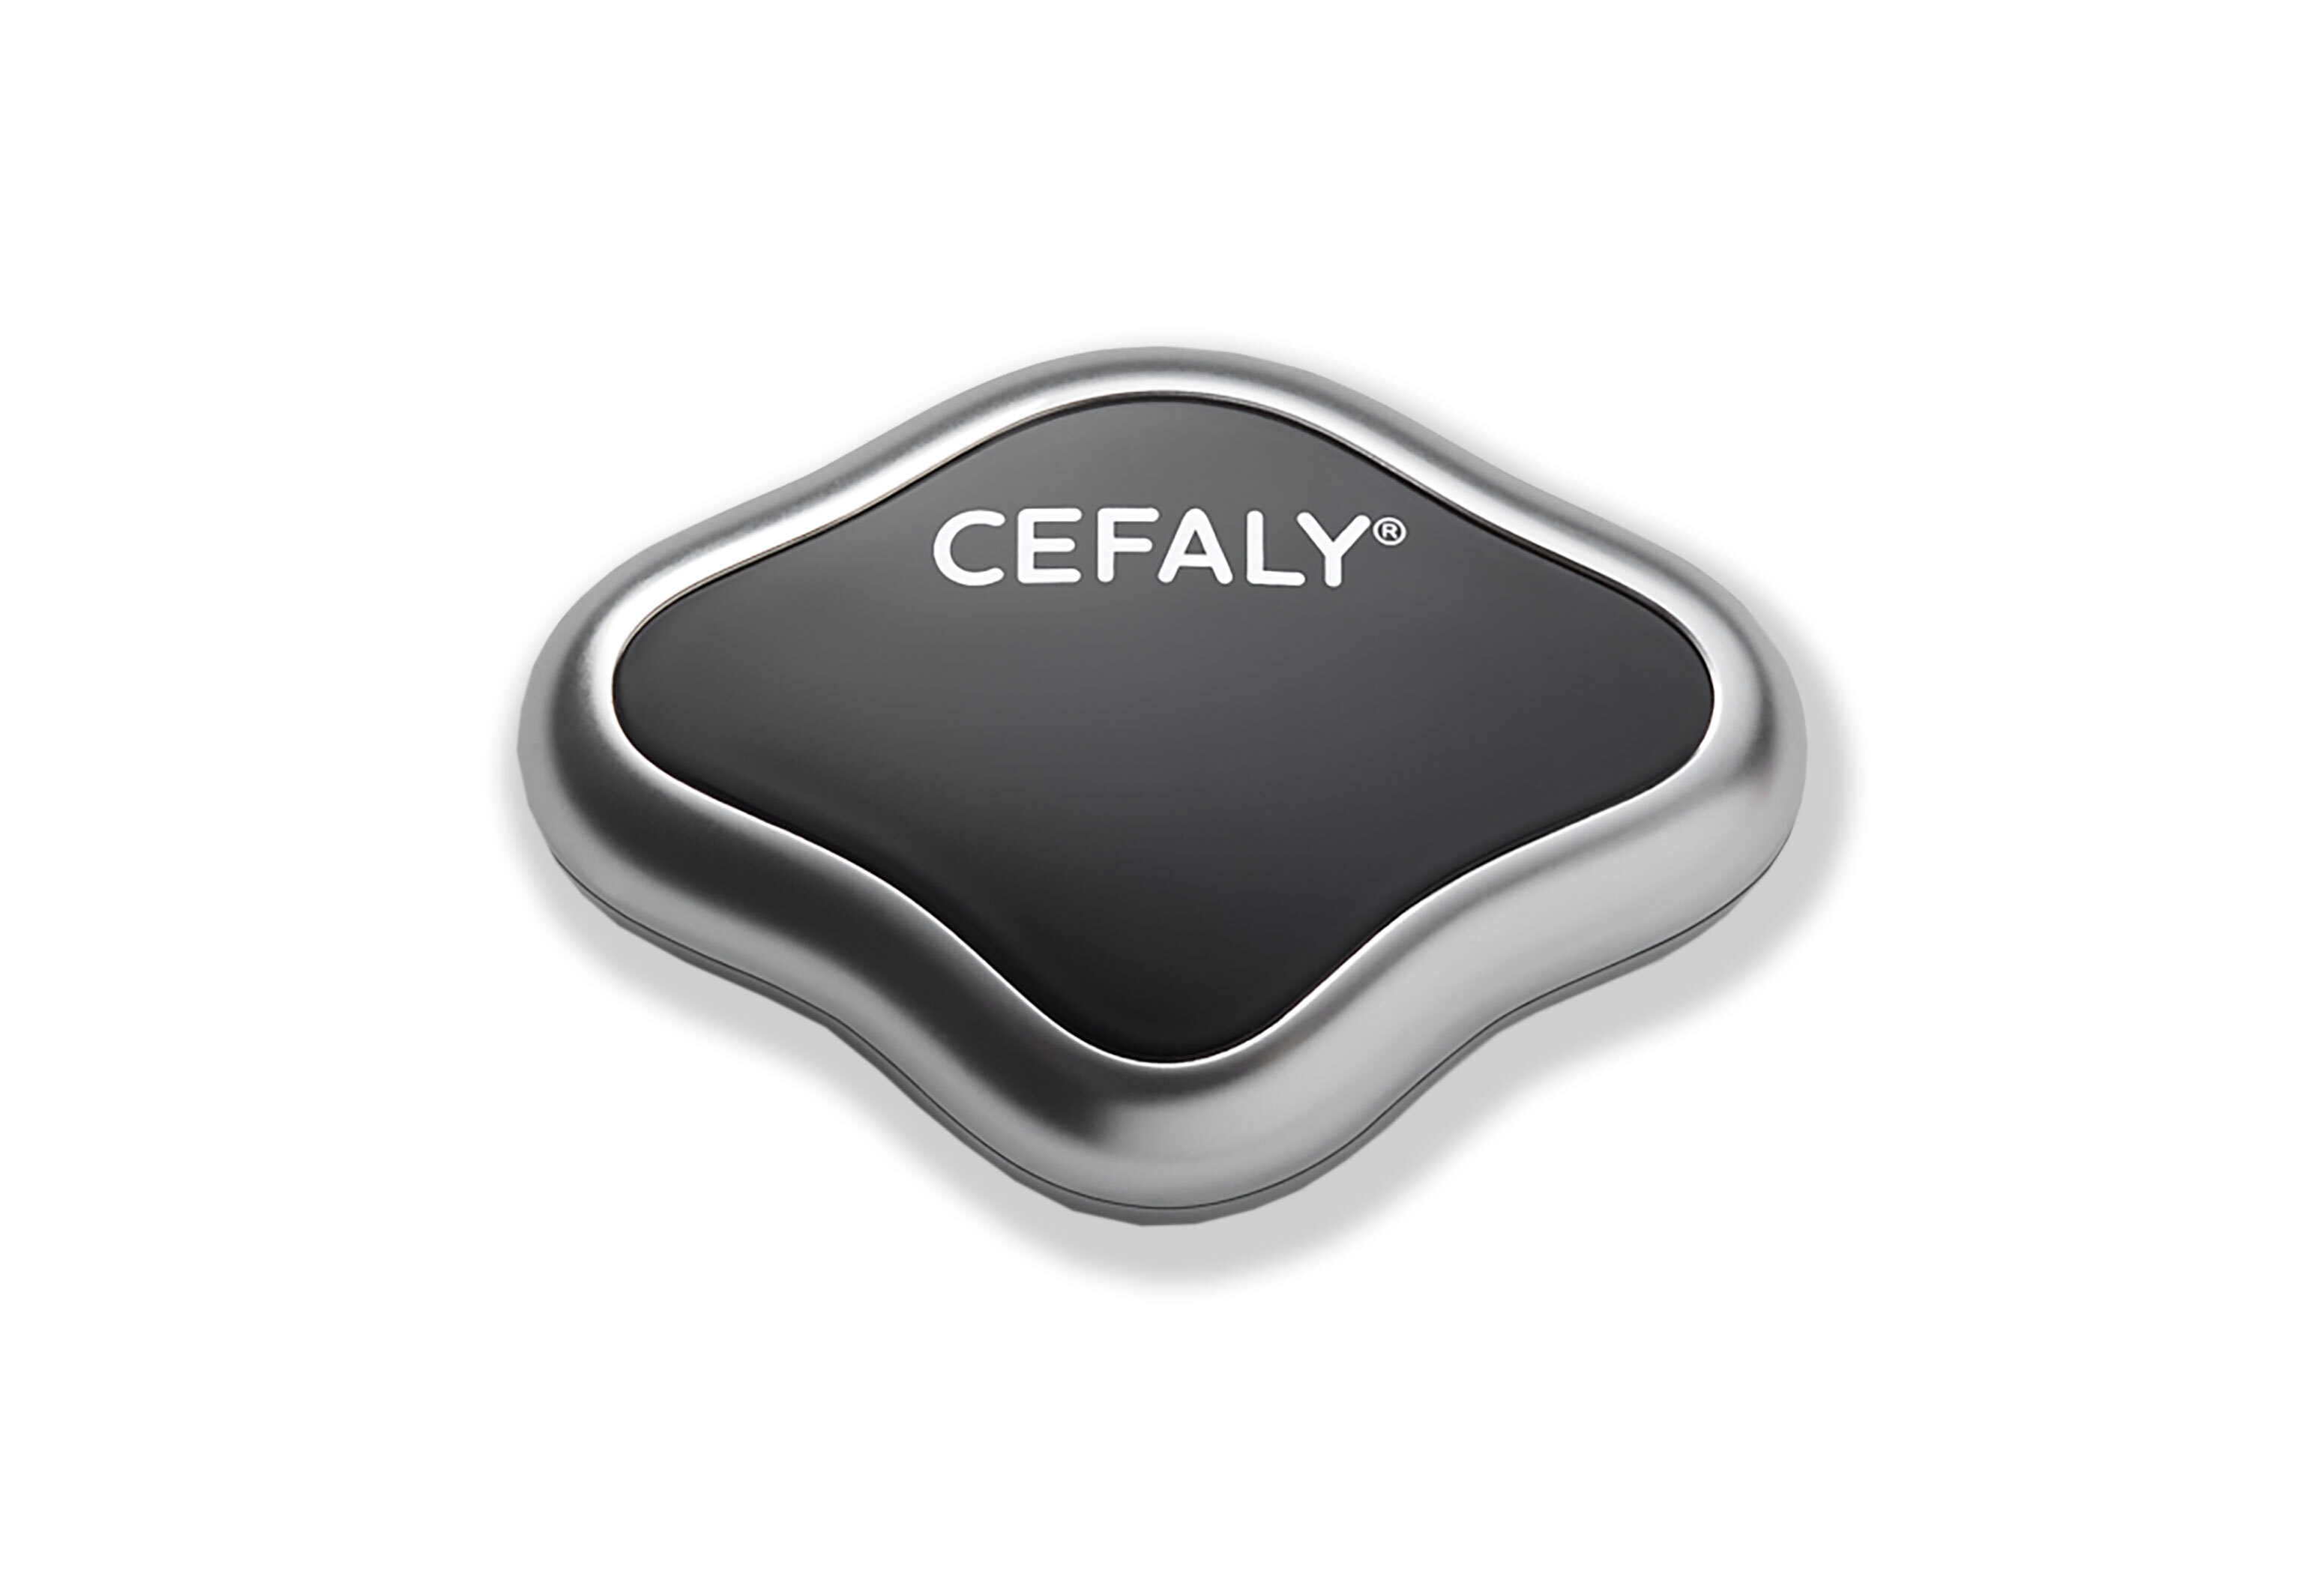  Cefaly Migraine treatment and prevention device with electrode laid out on work desk  11